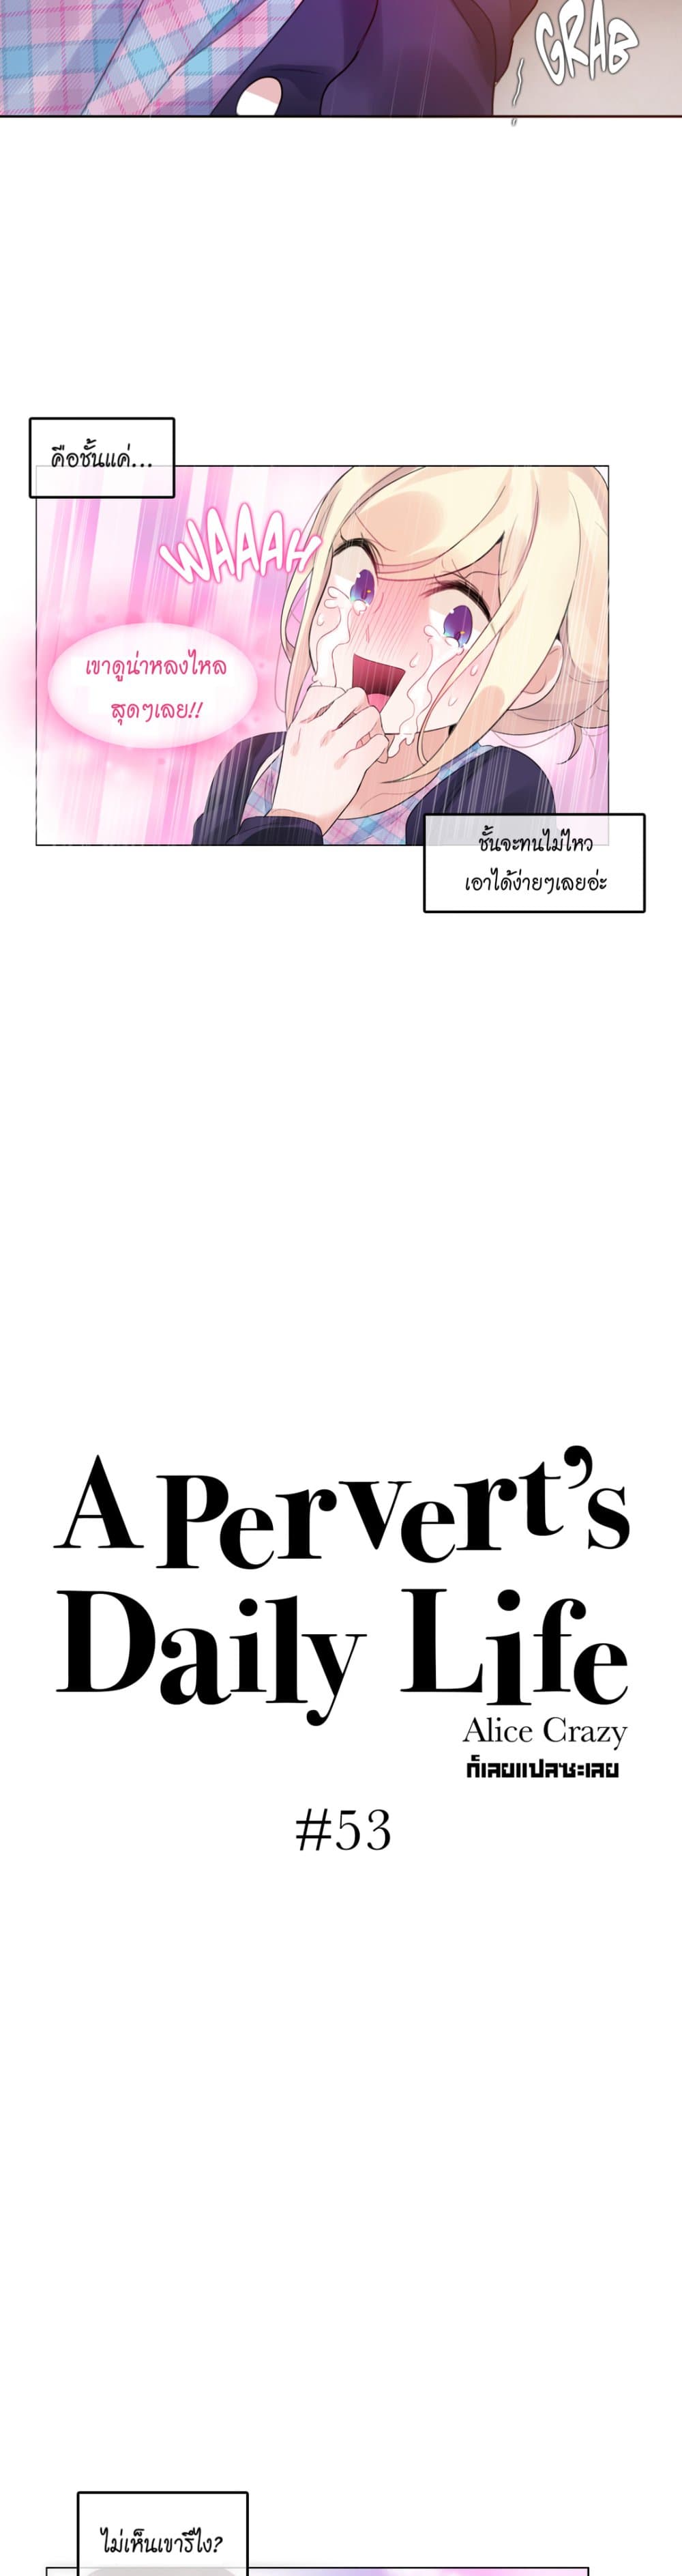 A Pervert's Daily Life 53-53